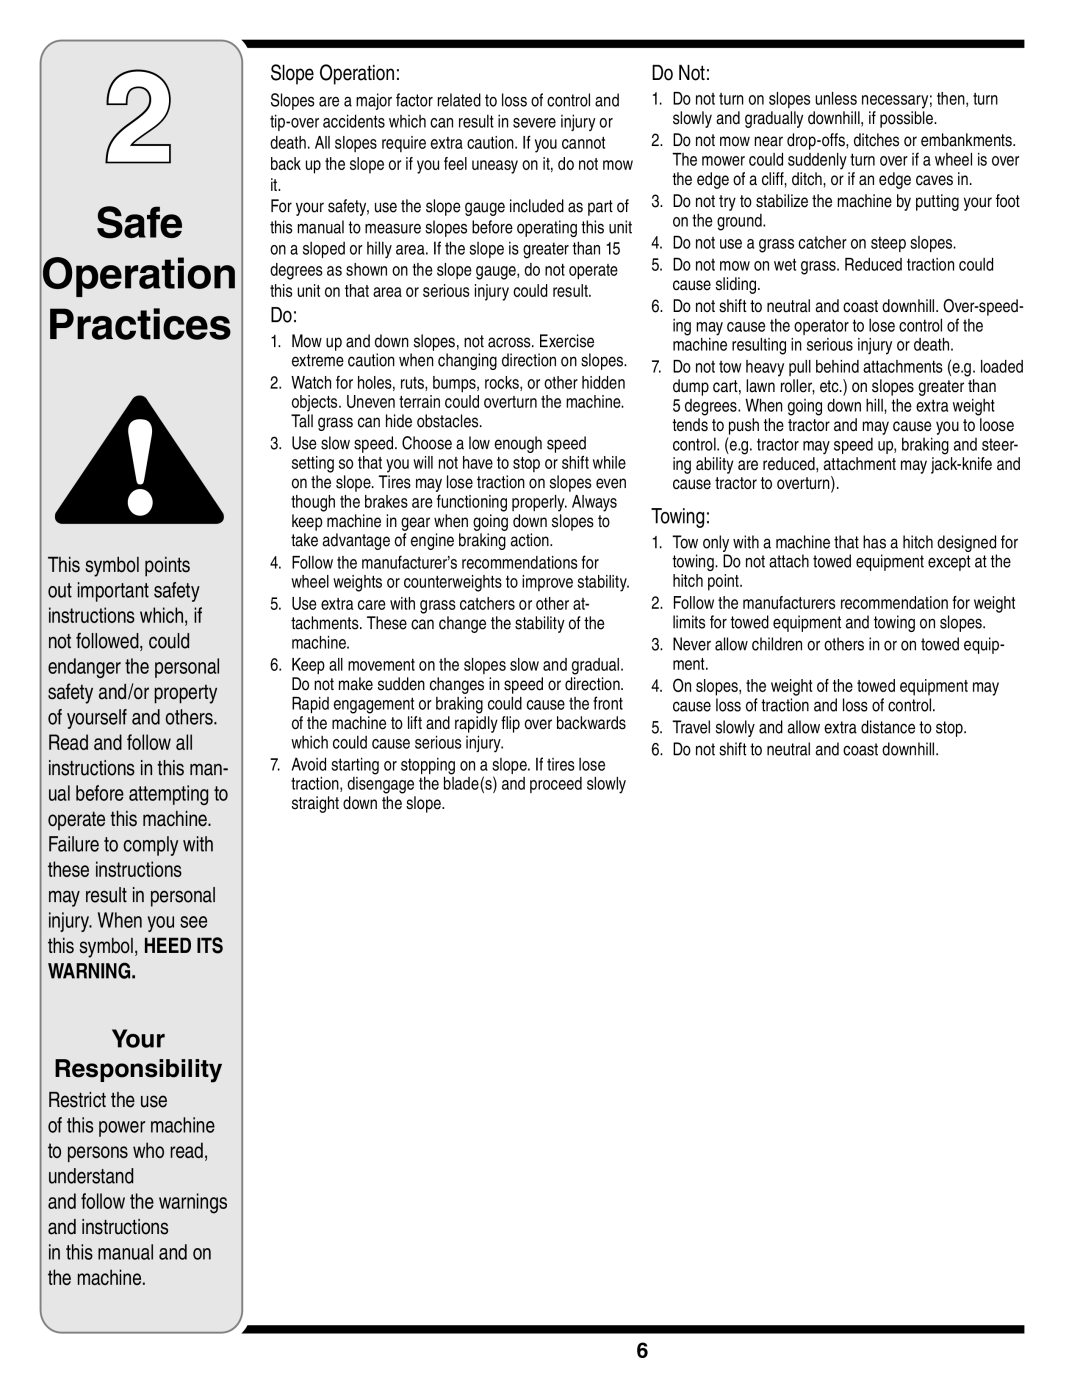 White Outdoor 606 Safe Operation Practices, Your Responsibility, Restrict the use, in this manual and on the machine 